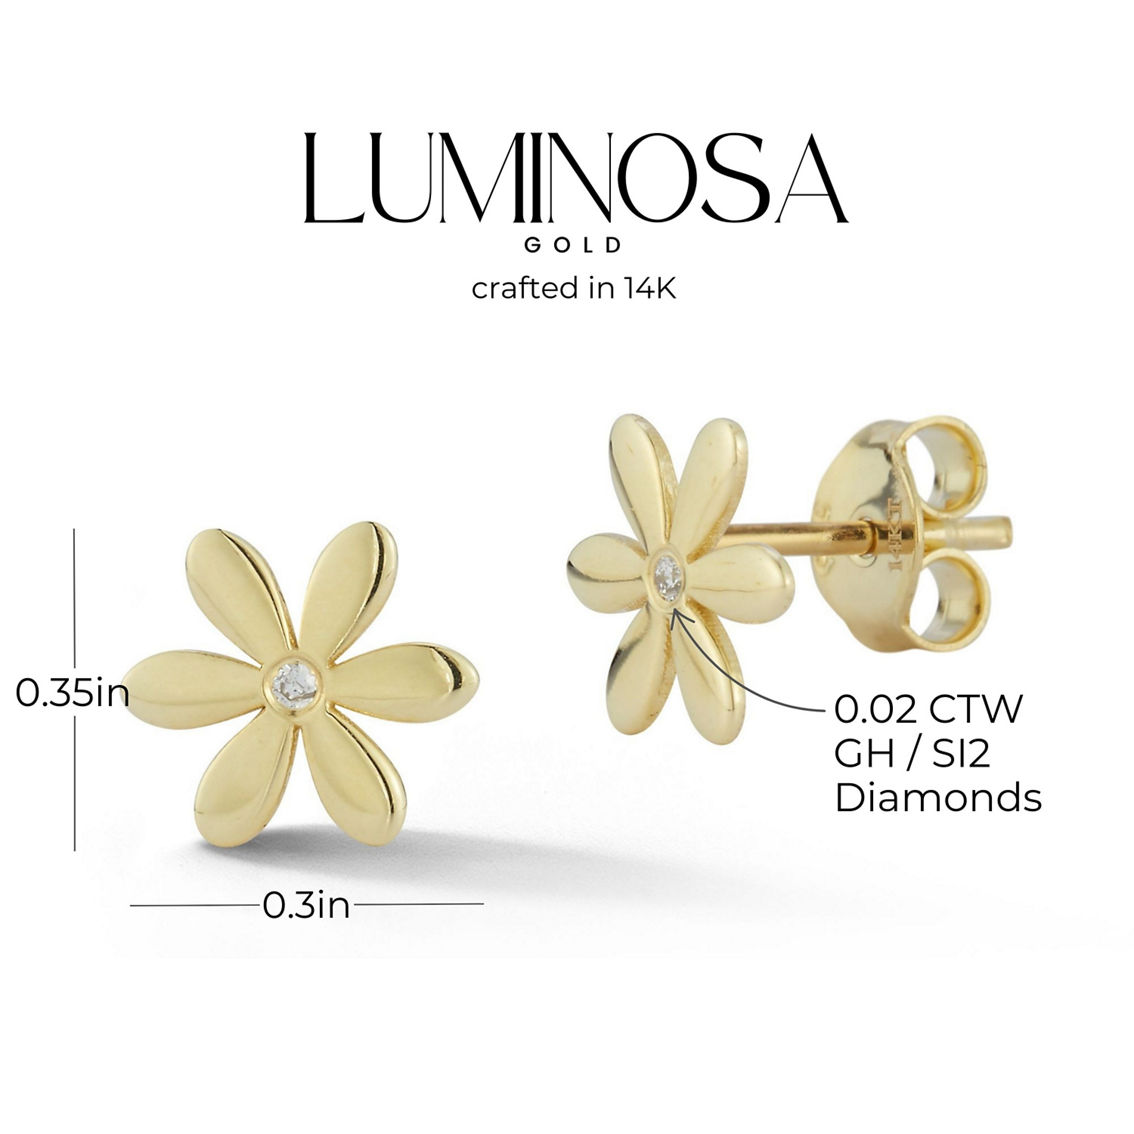 Luminosa Gold 14K Gold and Diamond Accent Flower Stud Earrings - Image 3 of 5